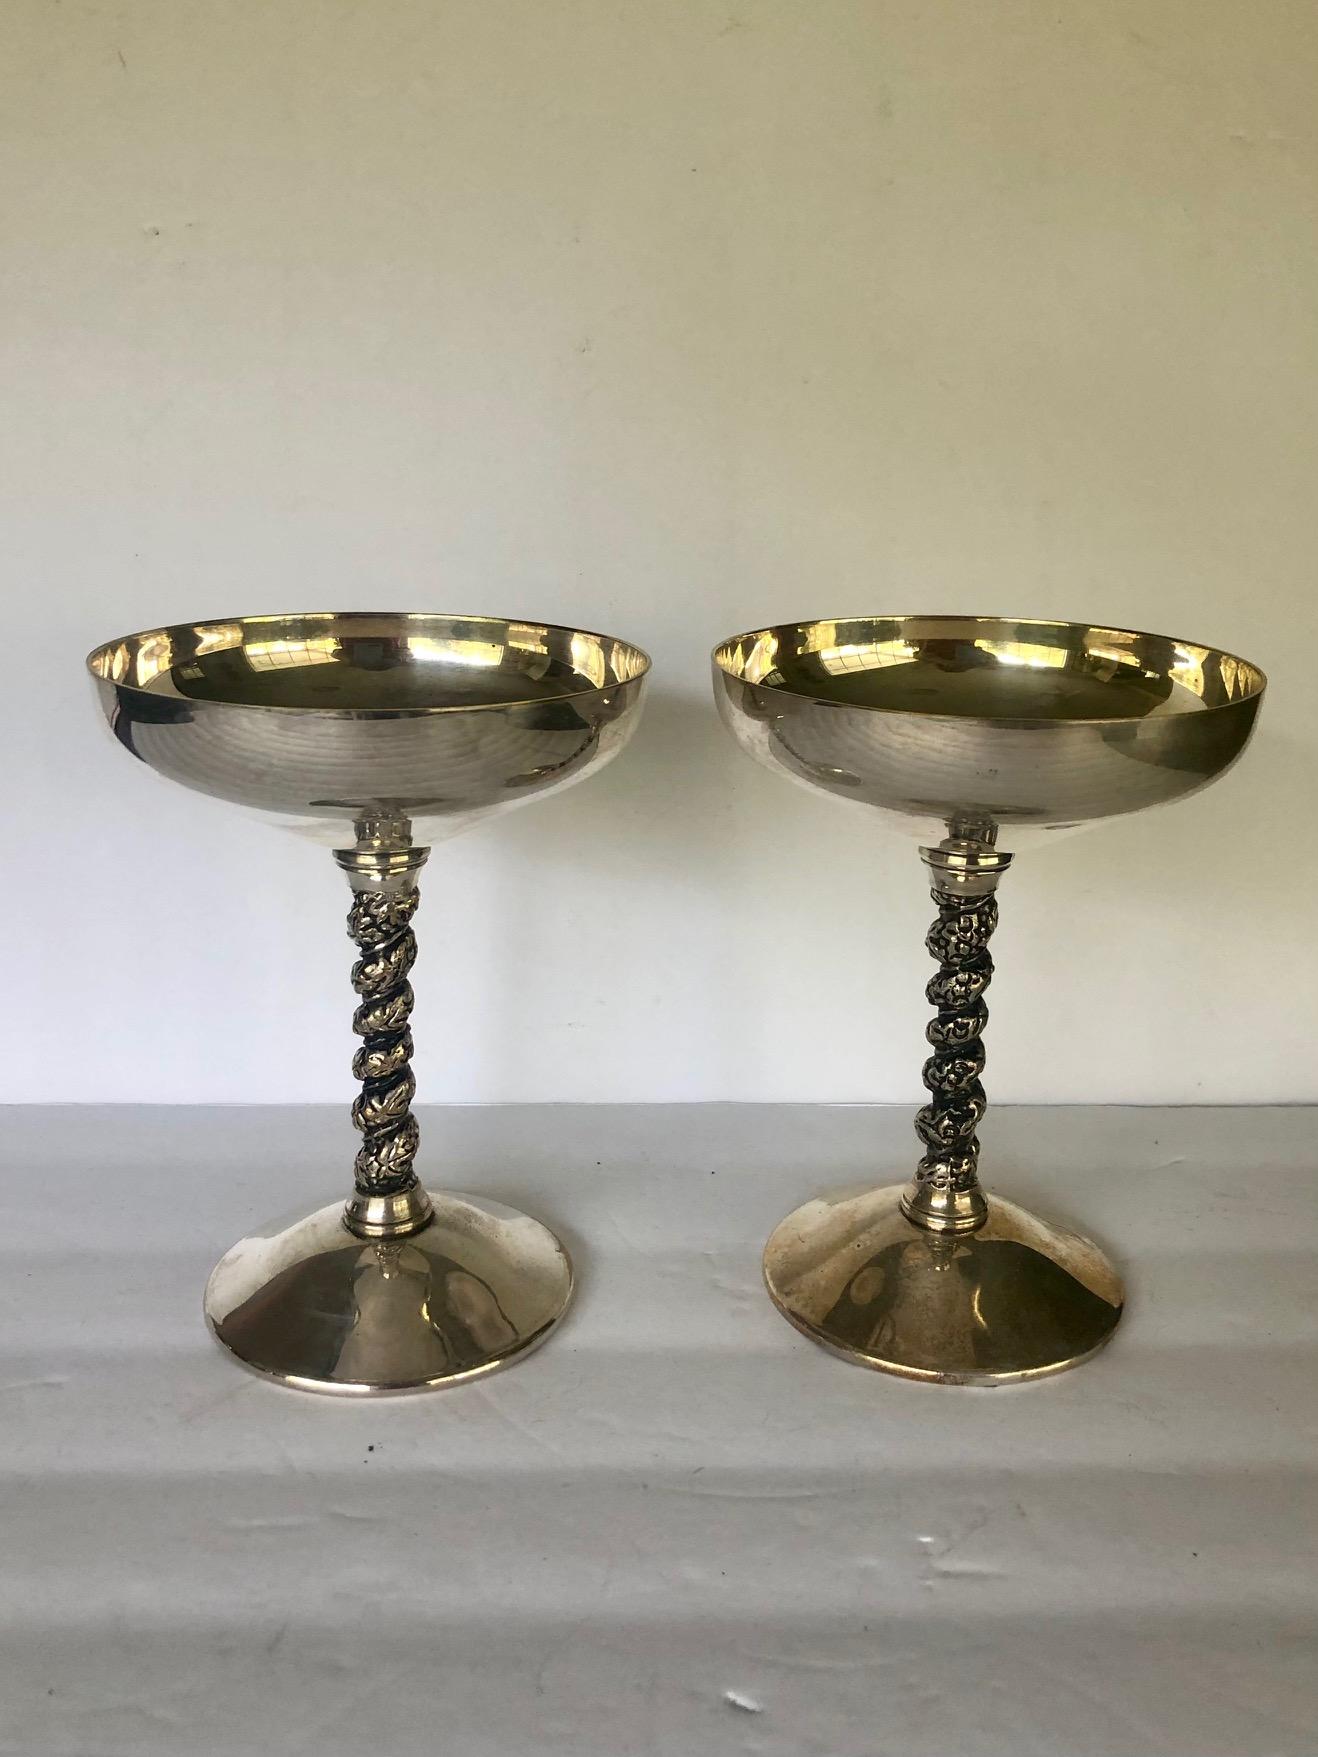 https://tookeybuxton.com/wp-content/uploads/2023/08/W-Adams-Spain-Silver-Champagne-Glasses-1.jpg